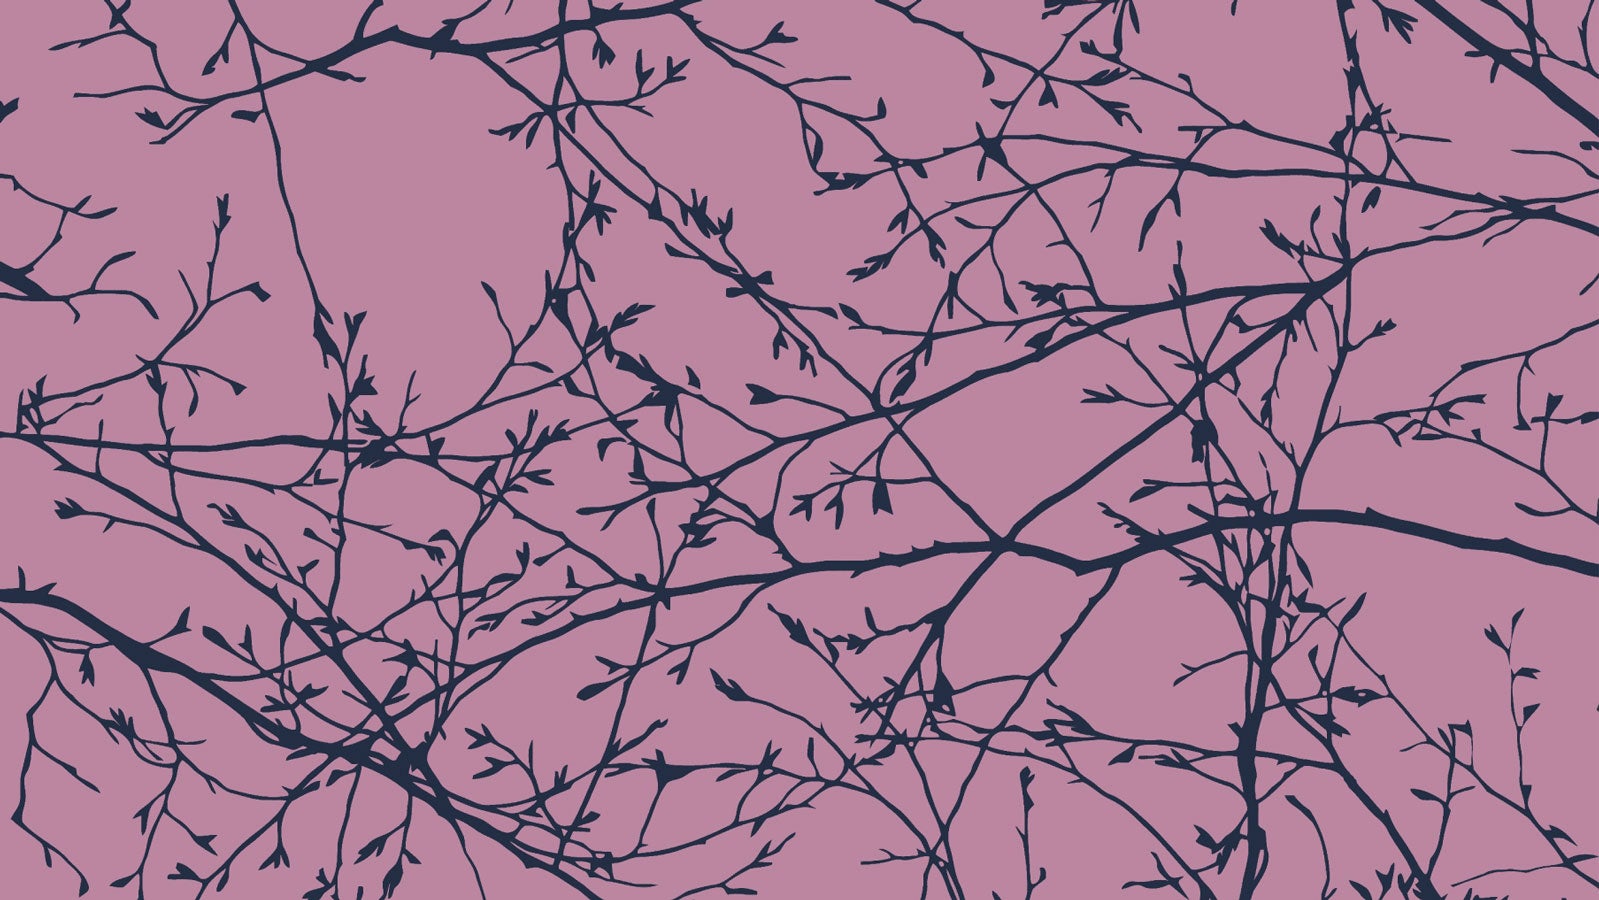 Pattern on blue branches against a pink background taken from the cover of Kate Clanchy's Selected Poems